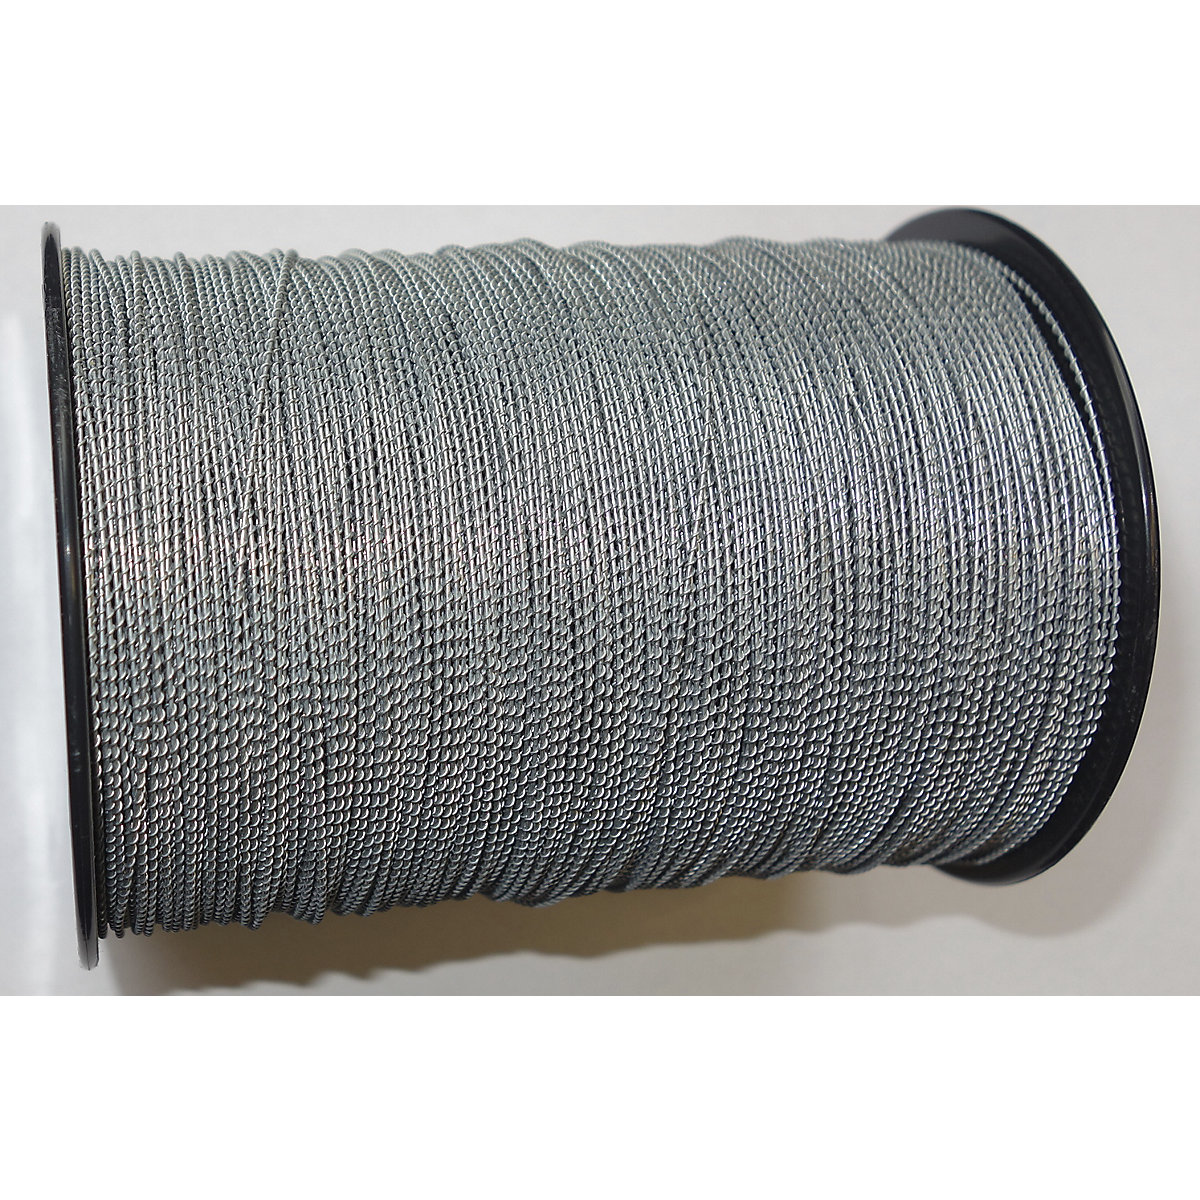 Sealing wire